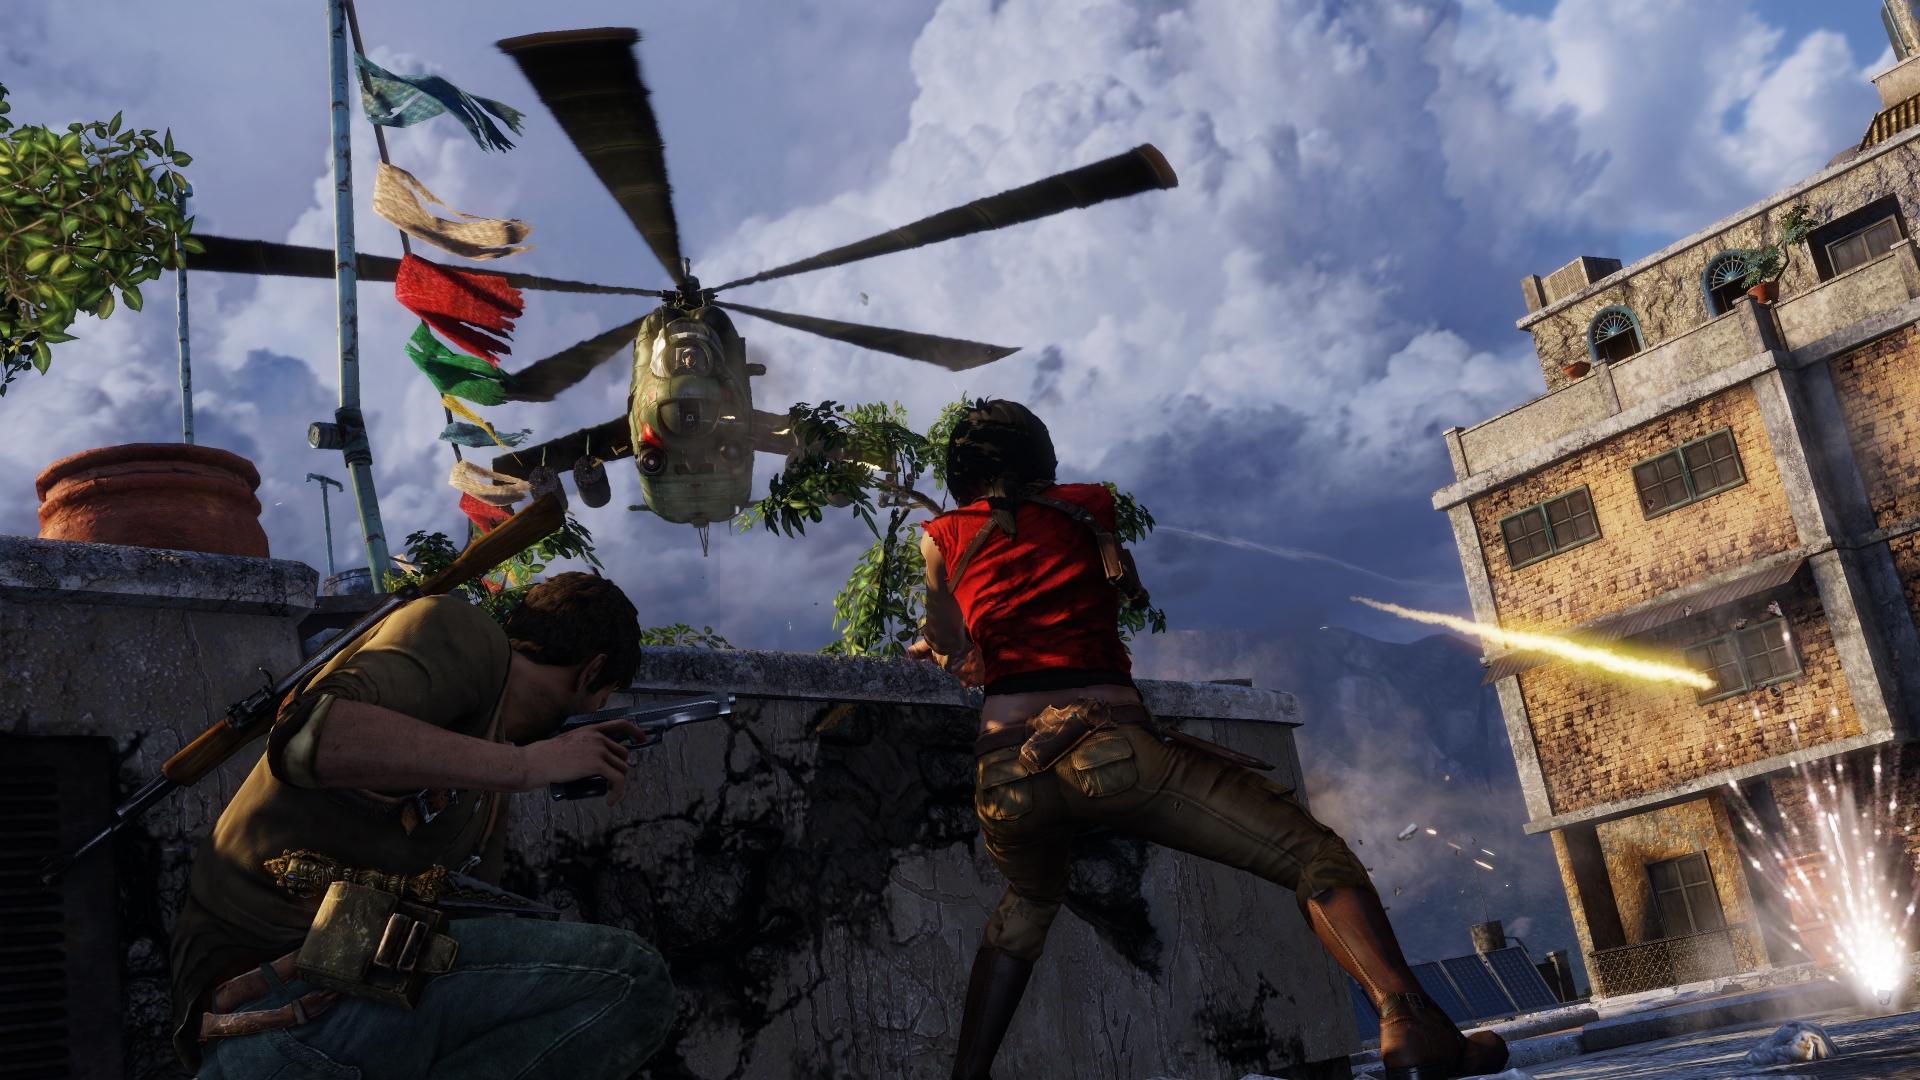 Uncharted 2 helicopter fight